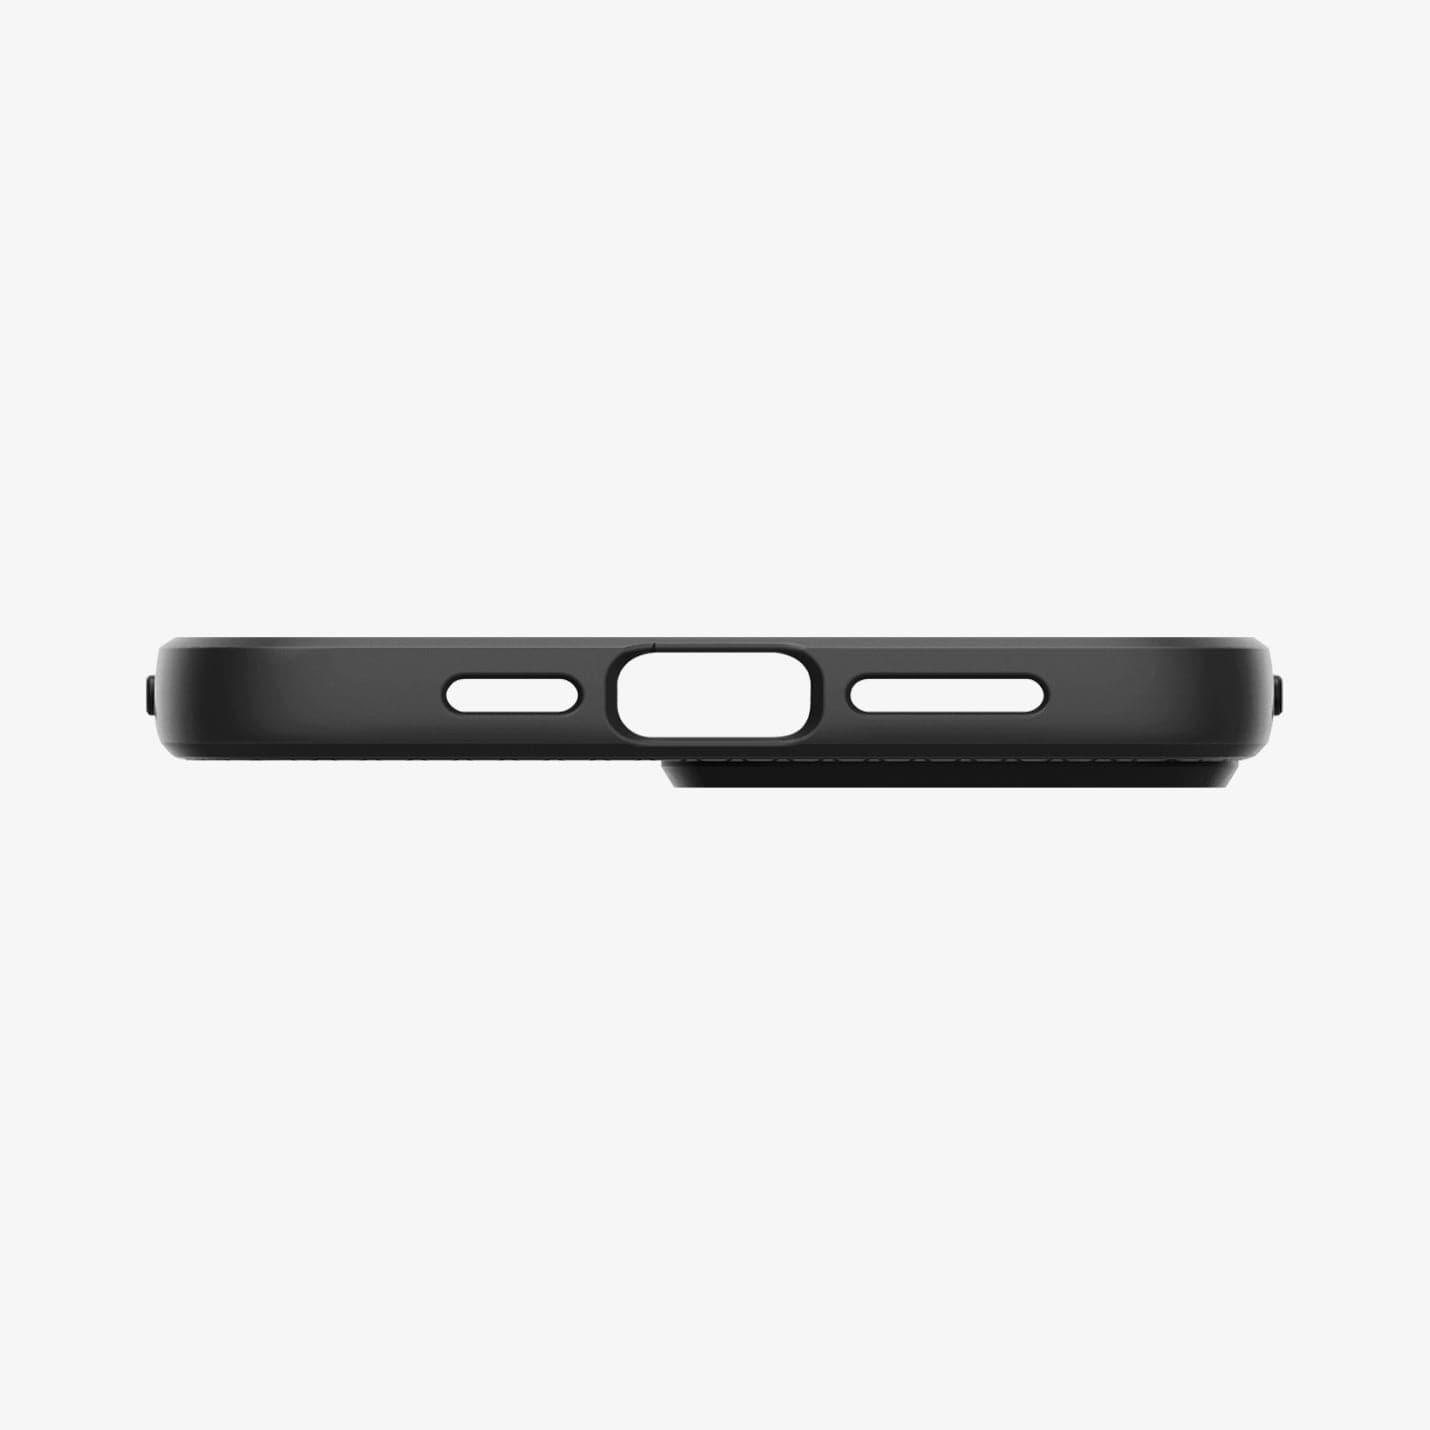 ACS03201 - iPhone 13 Pro Max Case Liquid Air in black showing the bottom with precise cutouts